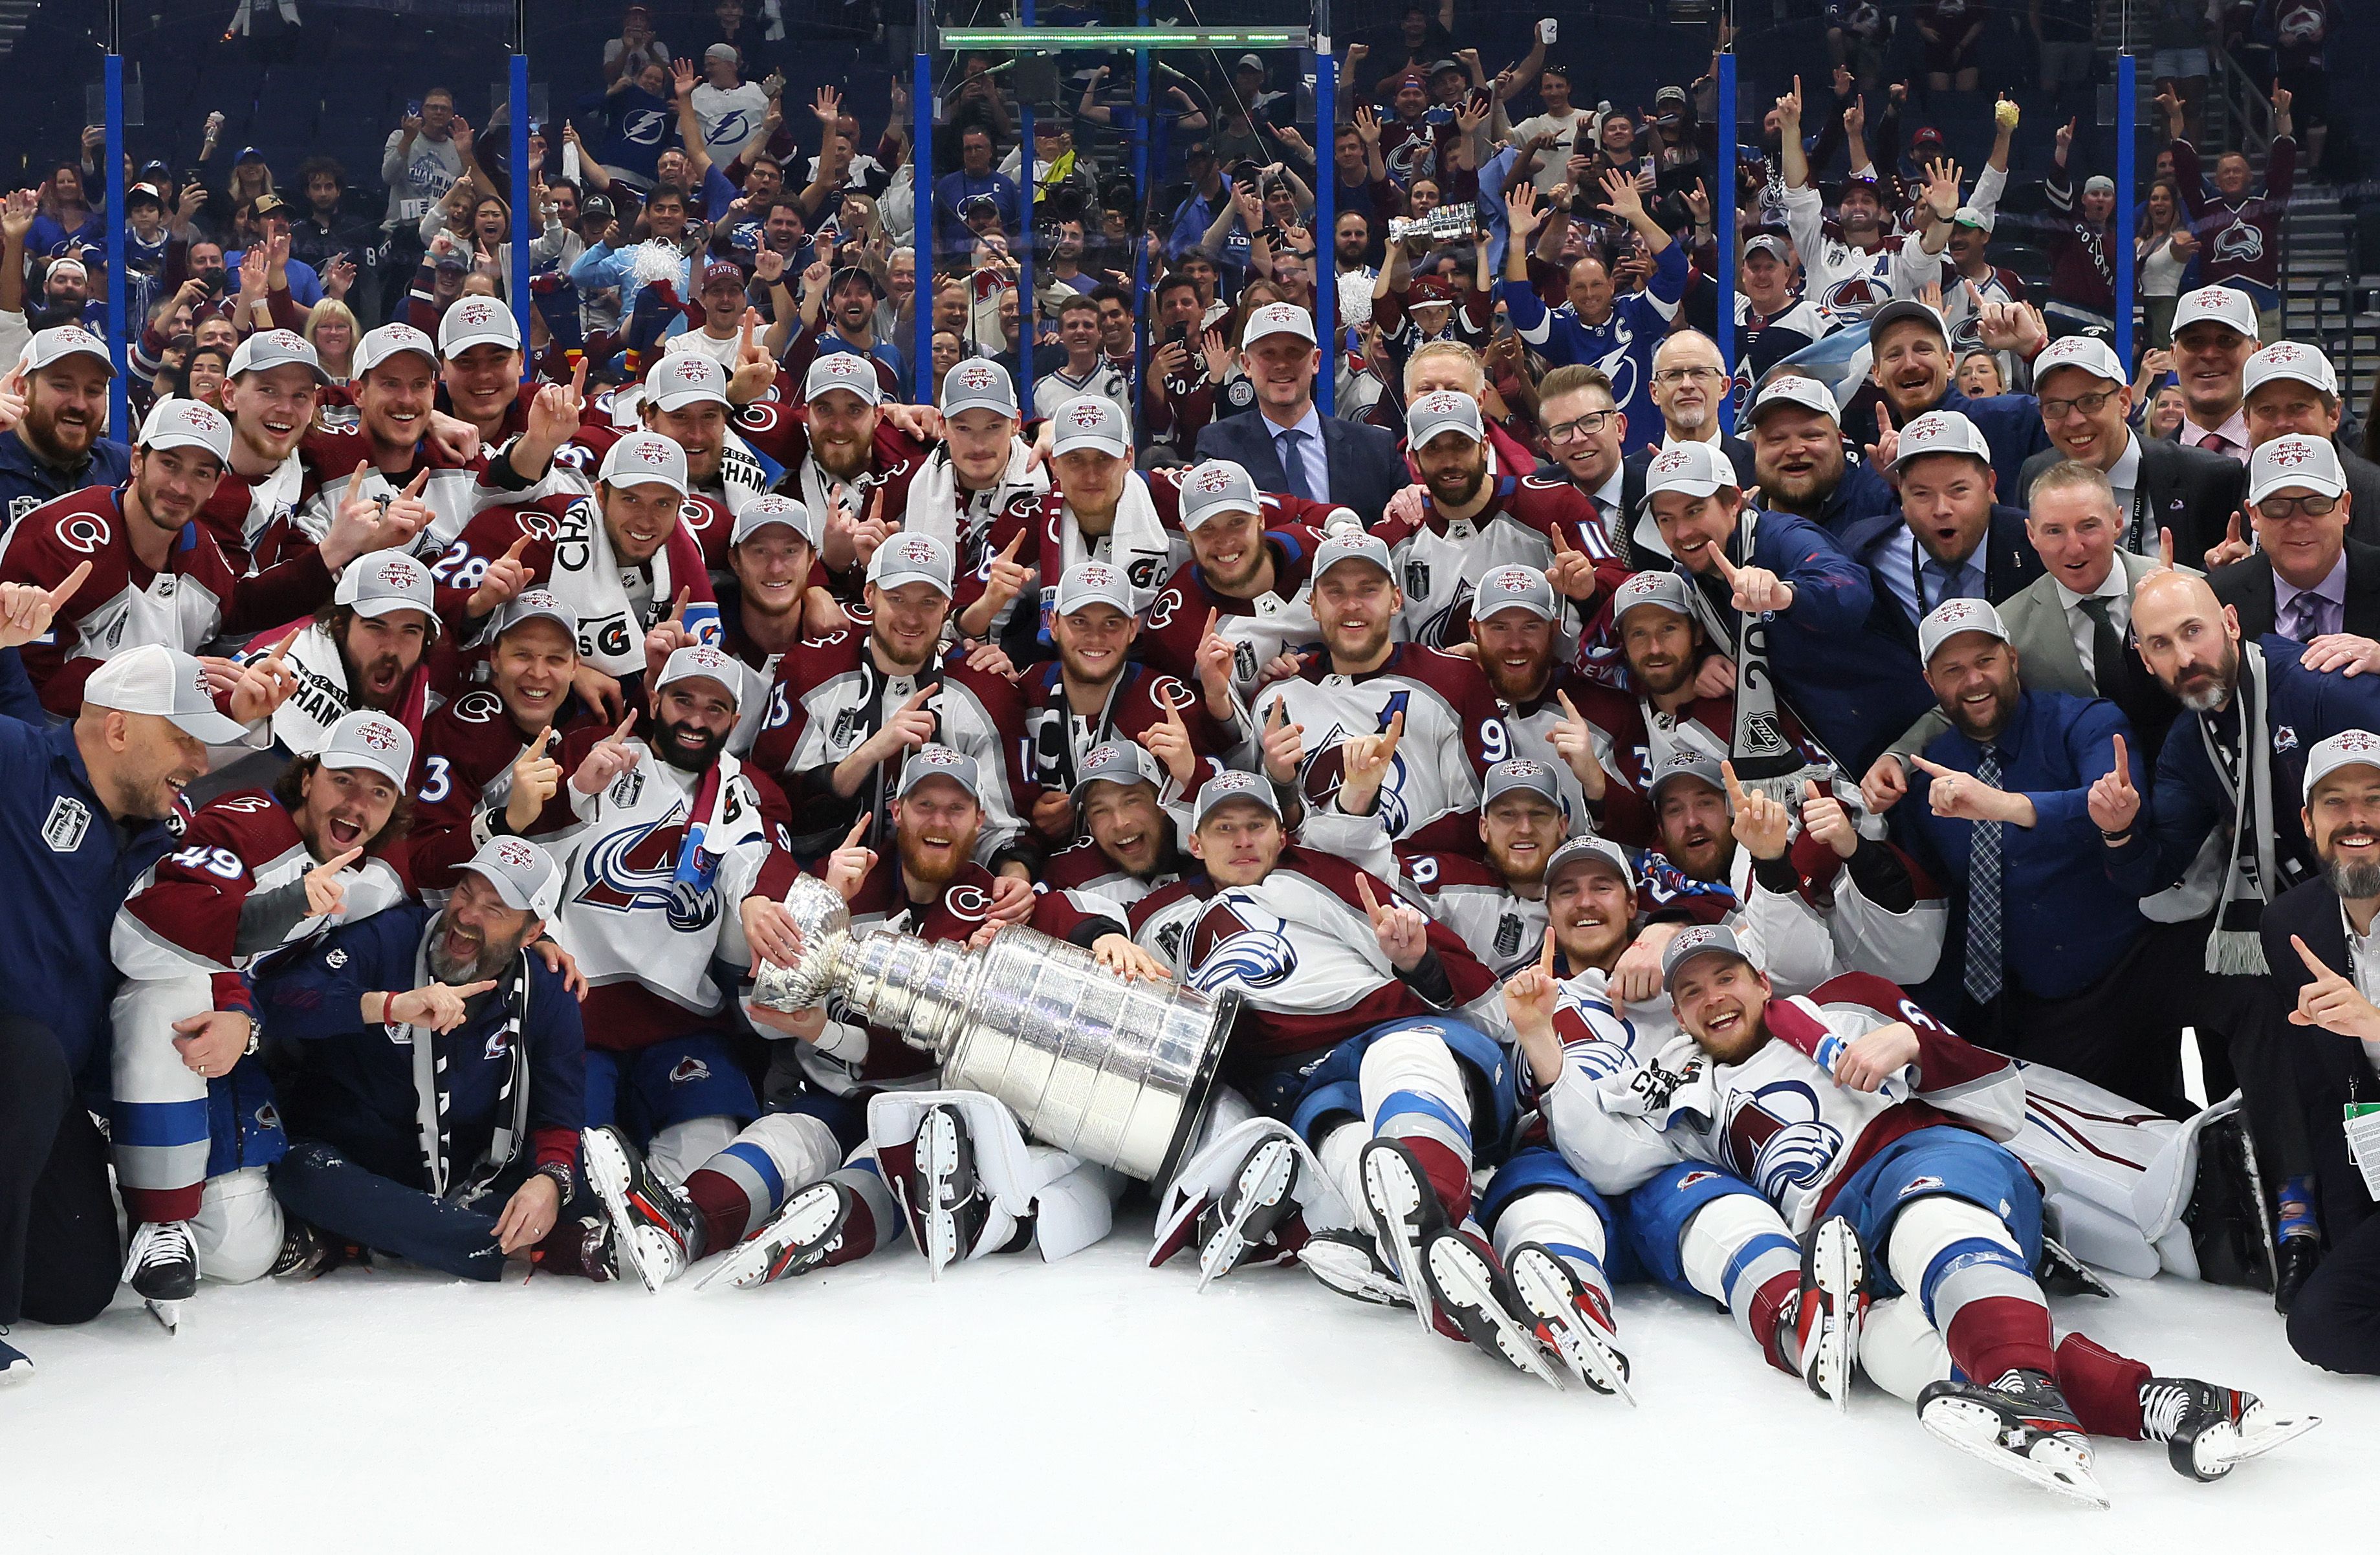  Colorado Avalanche coaches and players pose for a photo after defeating the Tampa Bay Lightning 2-1 in Game Six of the 2022 NHL Stanley Cup Final.